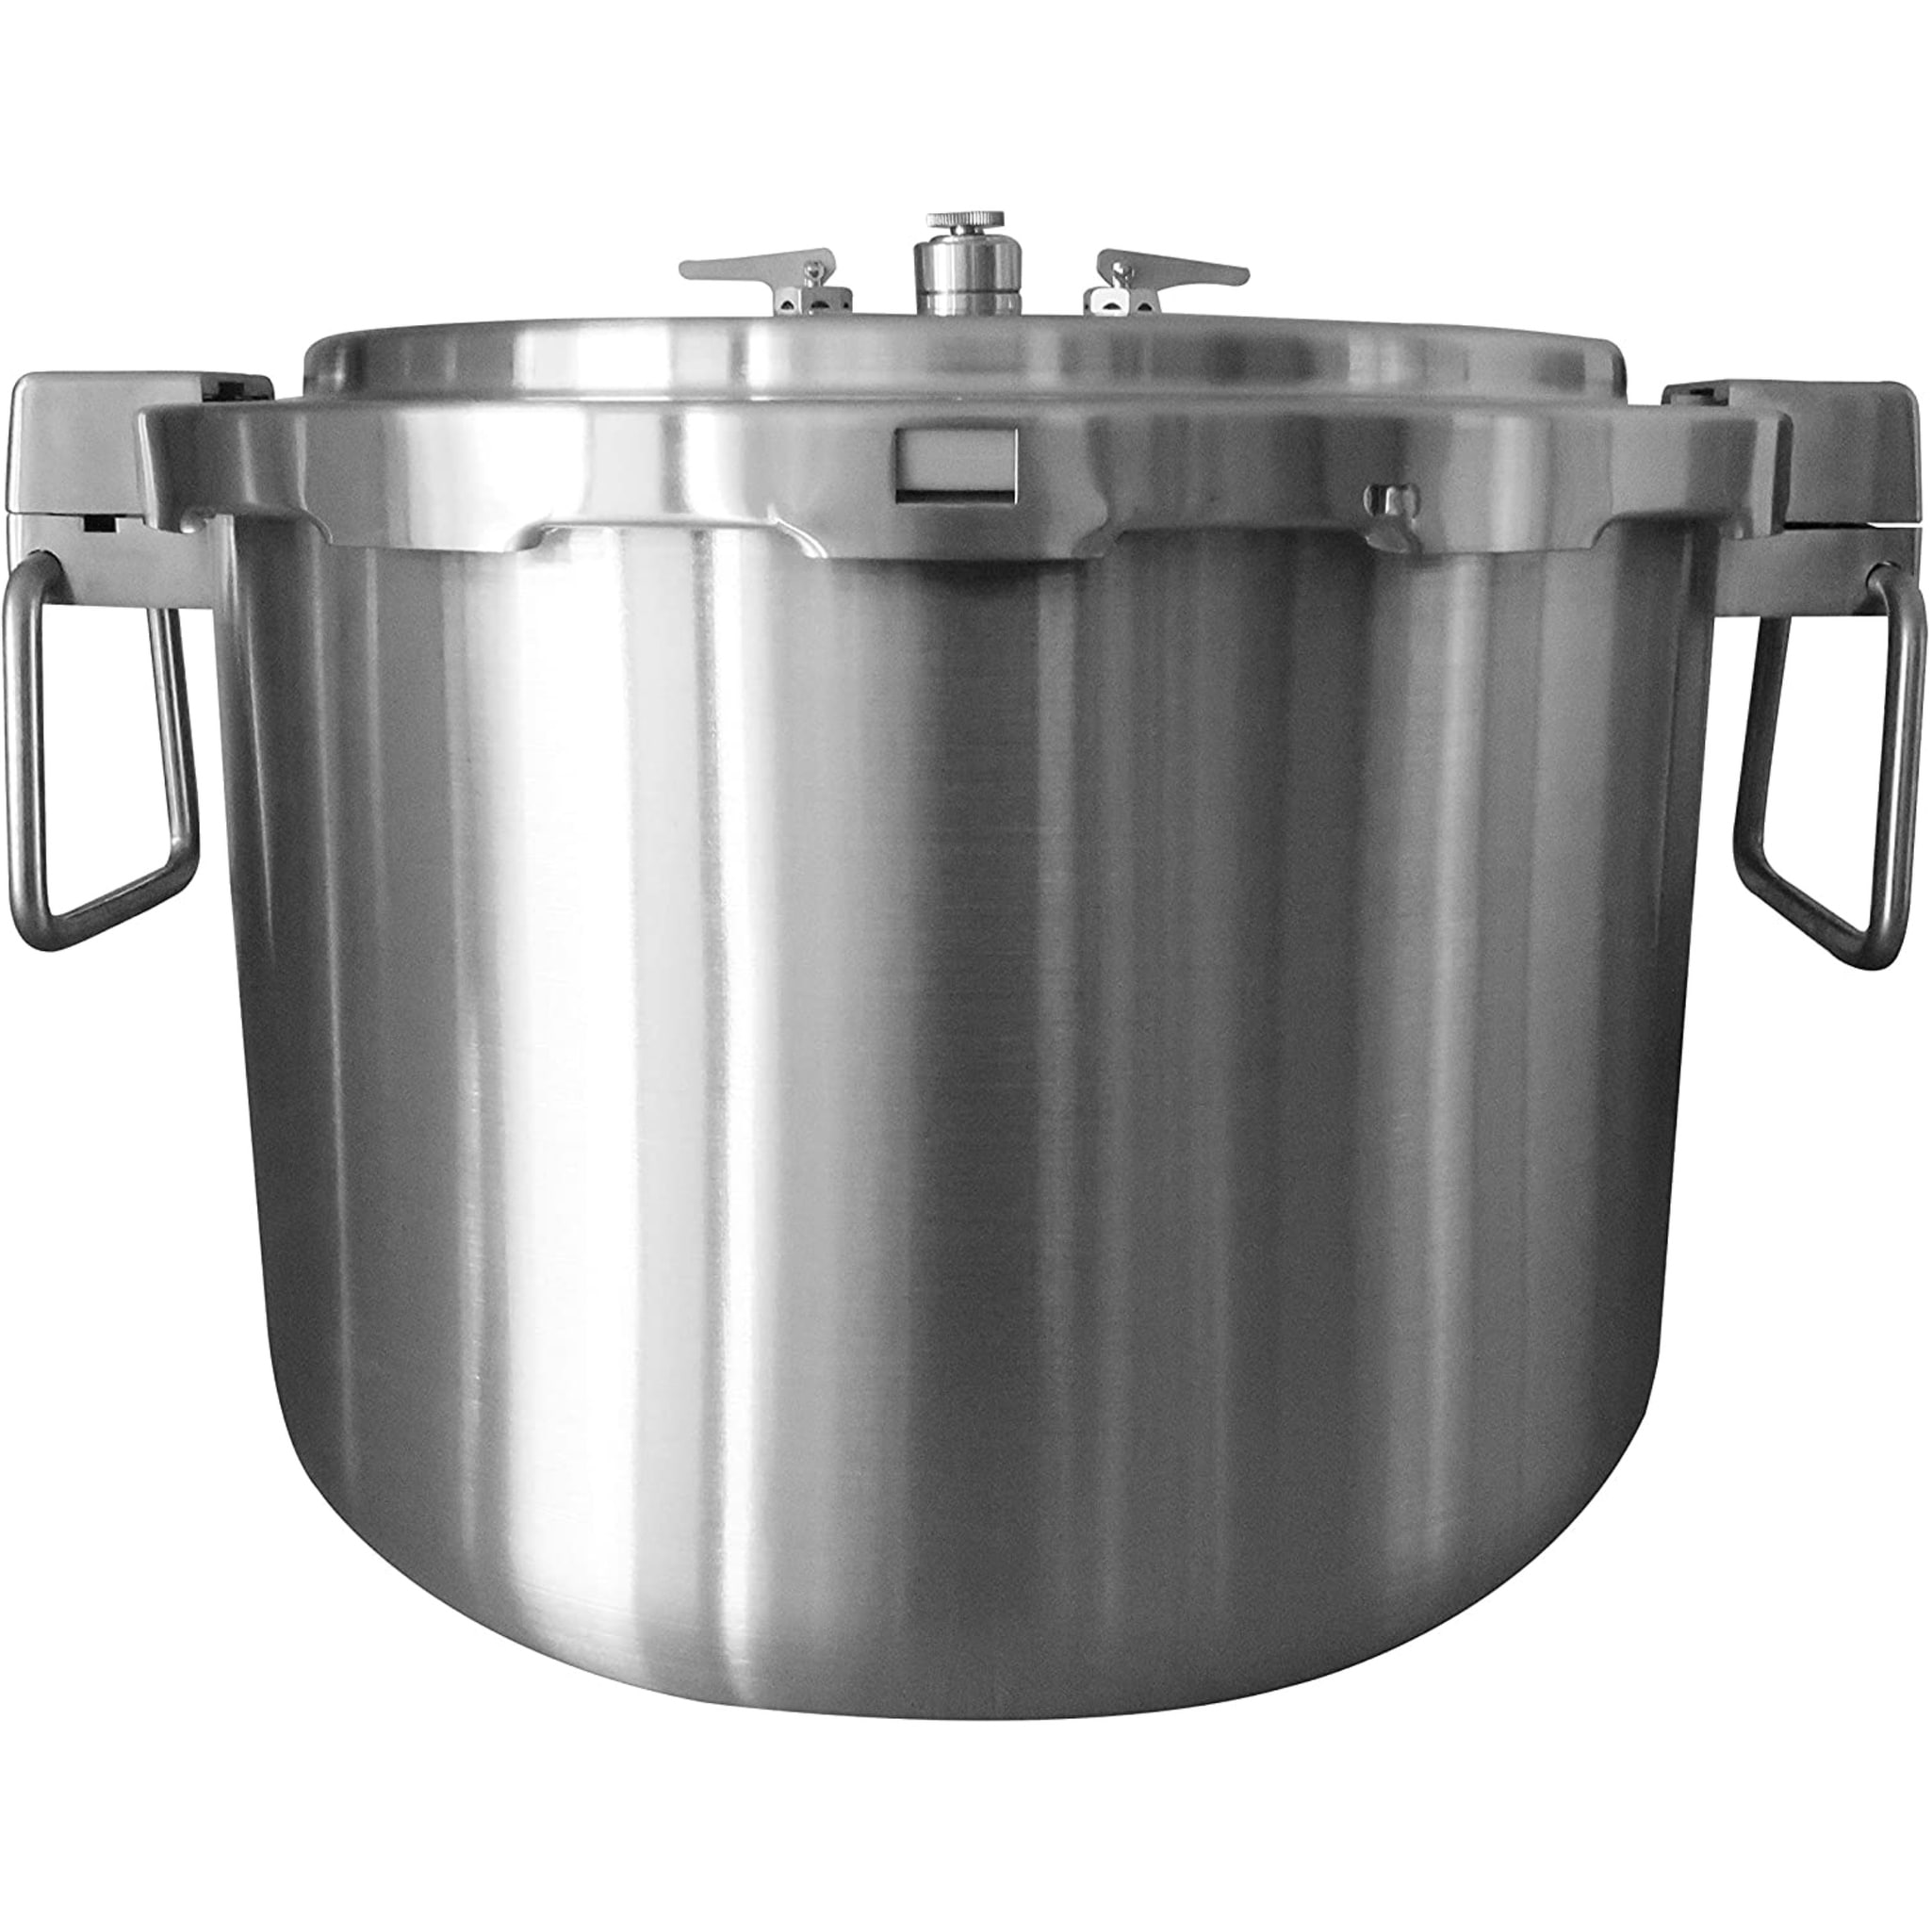 https://ak1.ostkcdn.com/images/products/is/images/direct/1831b19210945e7d7cf1b08267a1c37649d0b8a2/12-Quart-Stainless-Steel-Pressure-Cooker-Classic-series.jpg